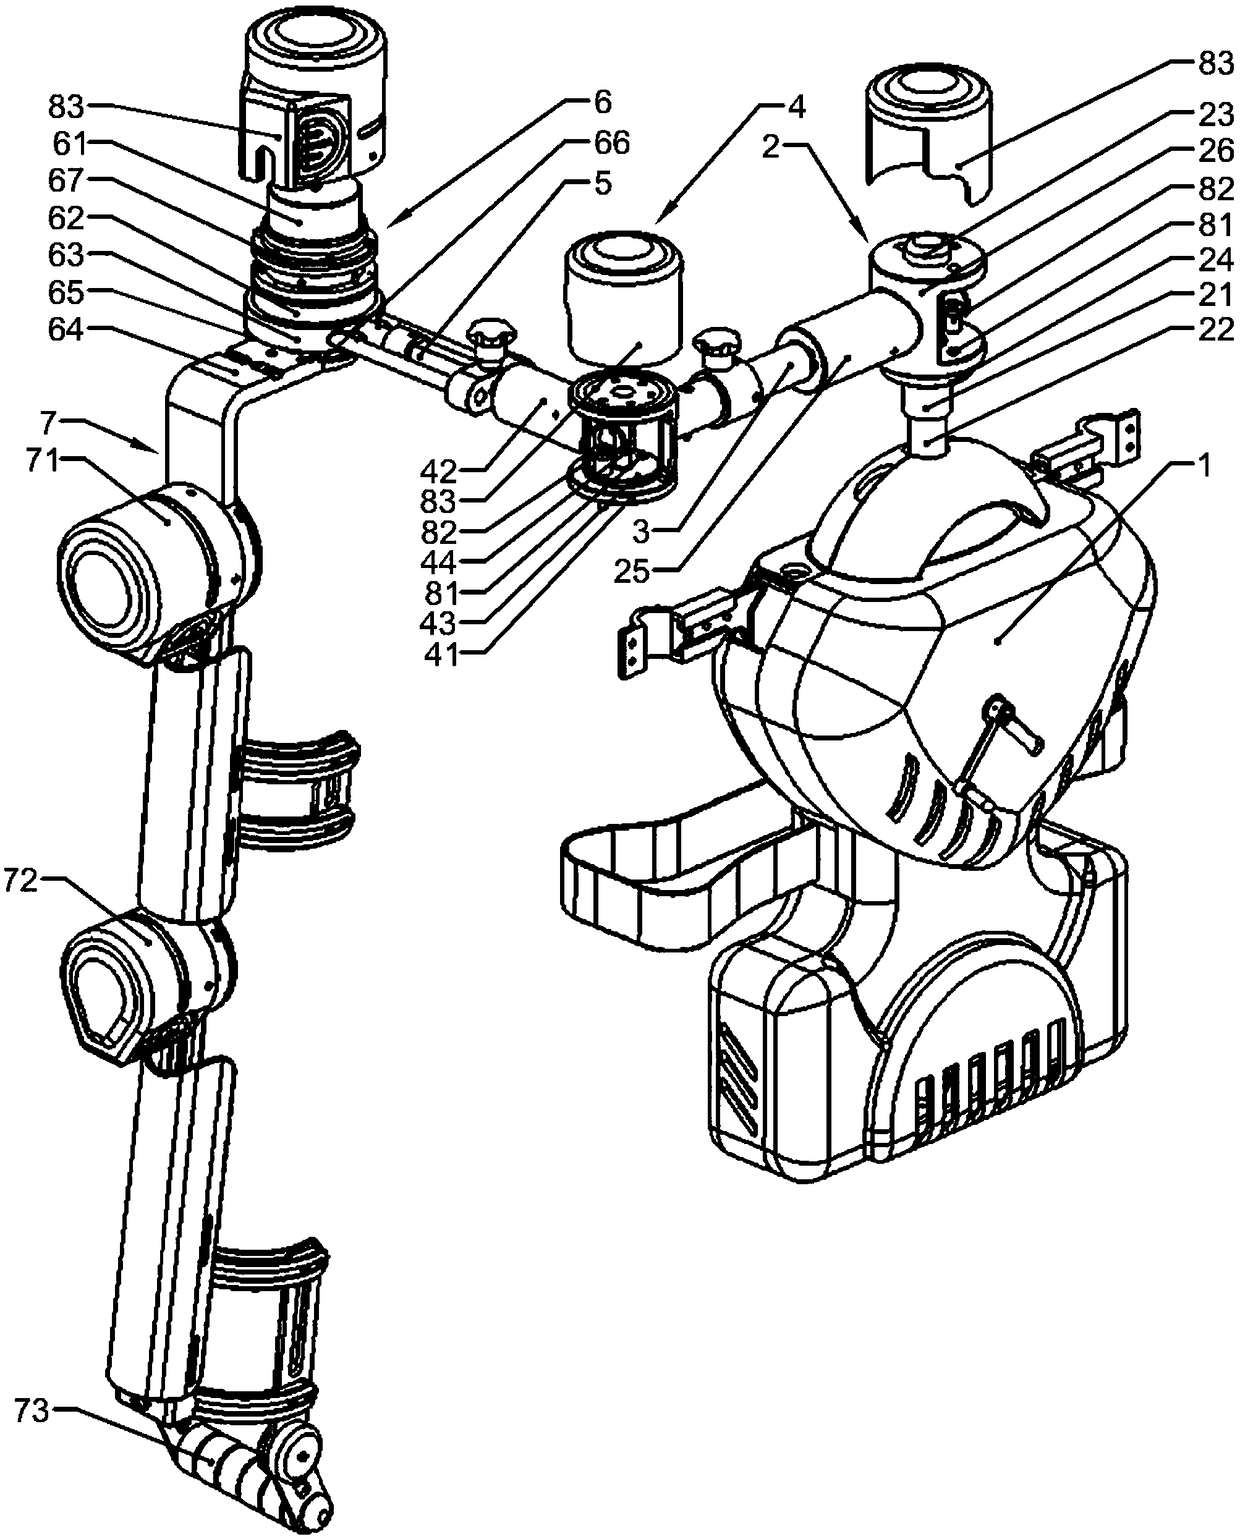 Upper-limb exoskeleton robot left and right hand interchanging device